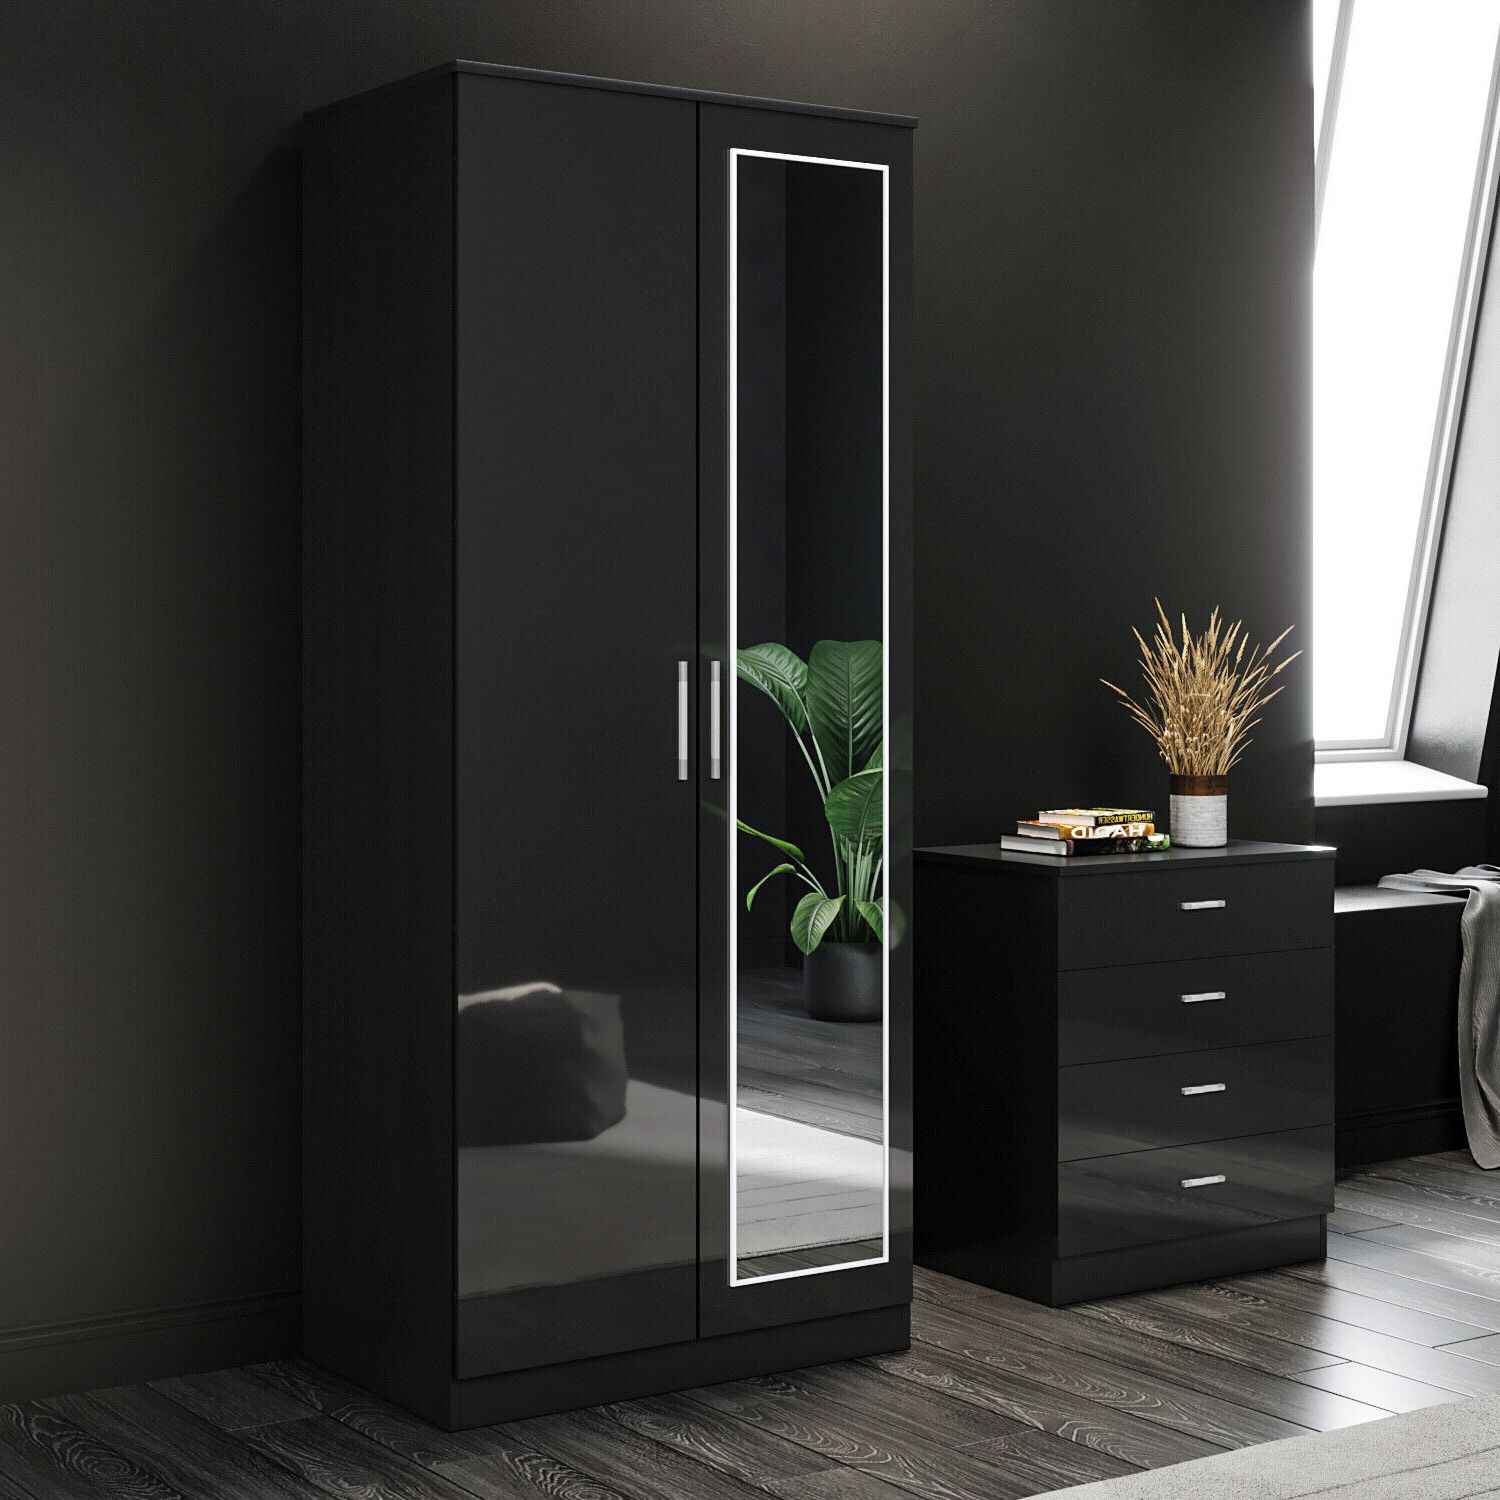 High Gloss 2 Door All Black Wardrobe Bedroom Furniture Storage With Hanging  Rail | Ebay With Regard To Cheap Black Gloss Wardrobes (View 4 of 20)